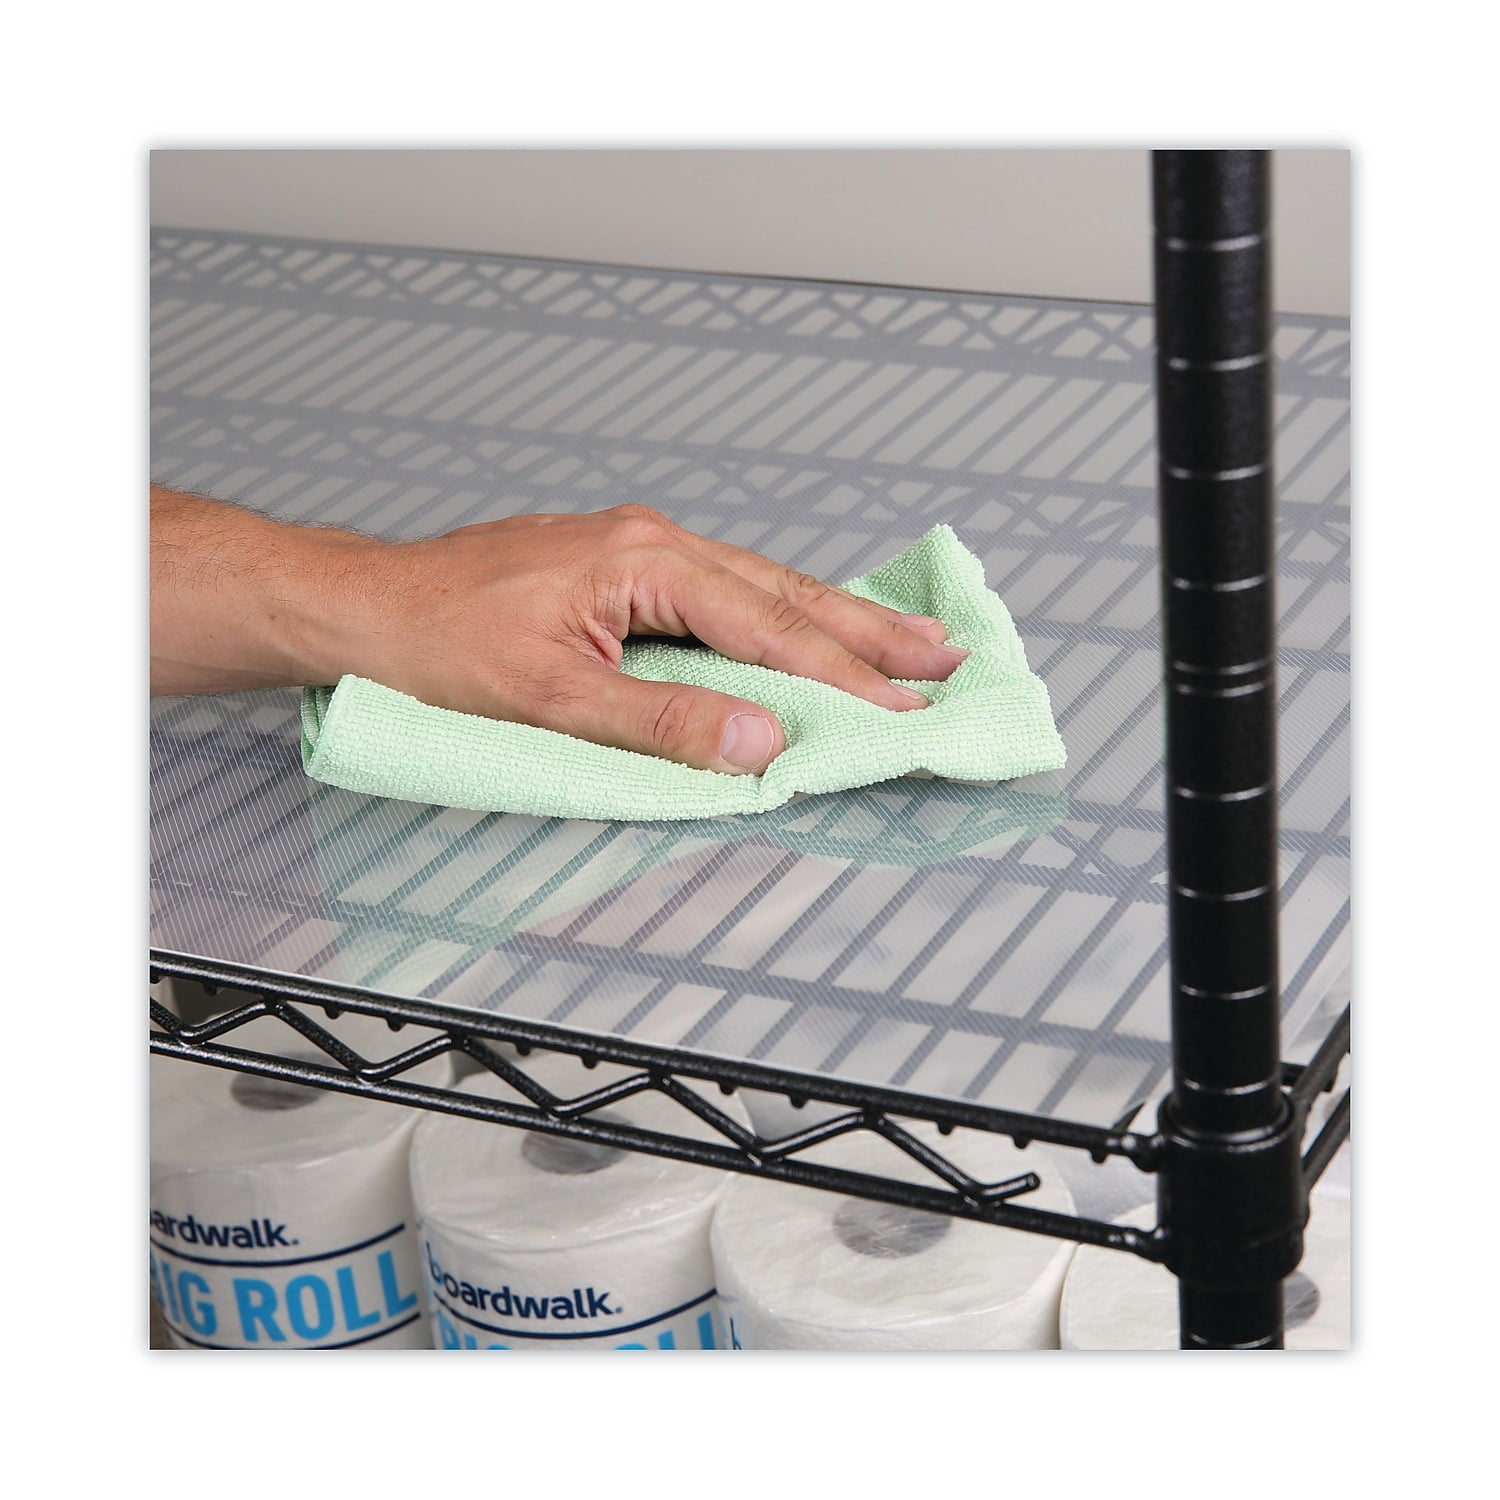 Shelf Liners for Wire Rack - Plastic Pre-Cut Shelving Covers